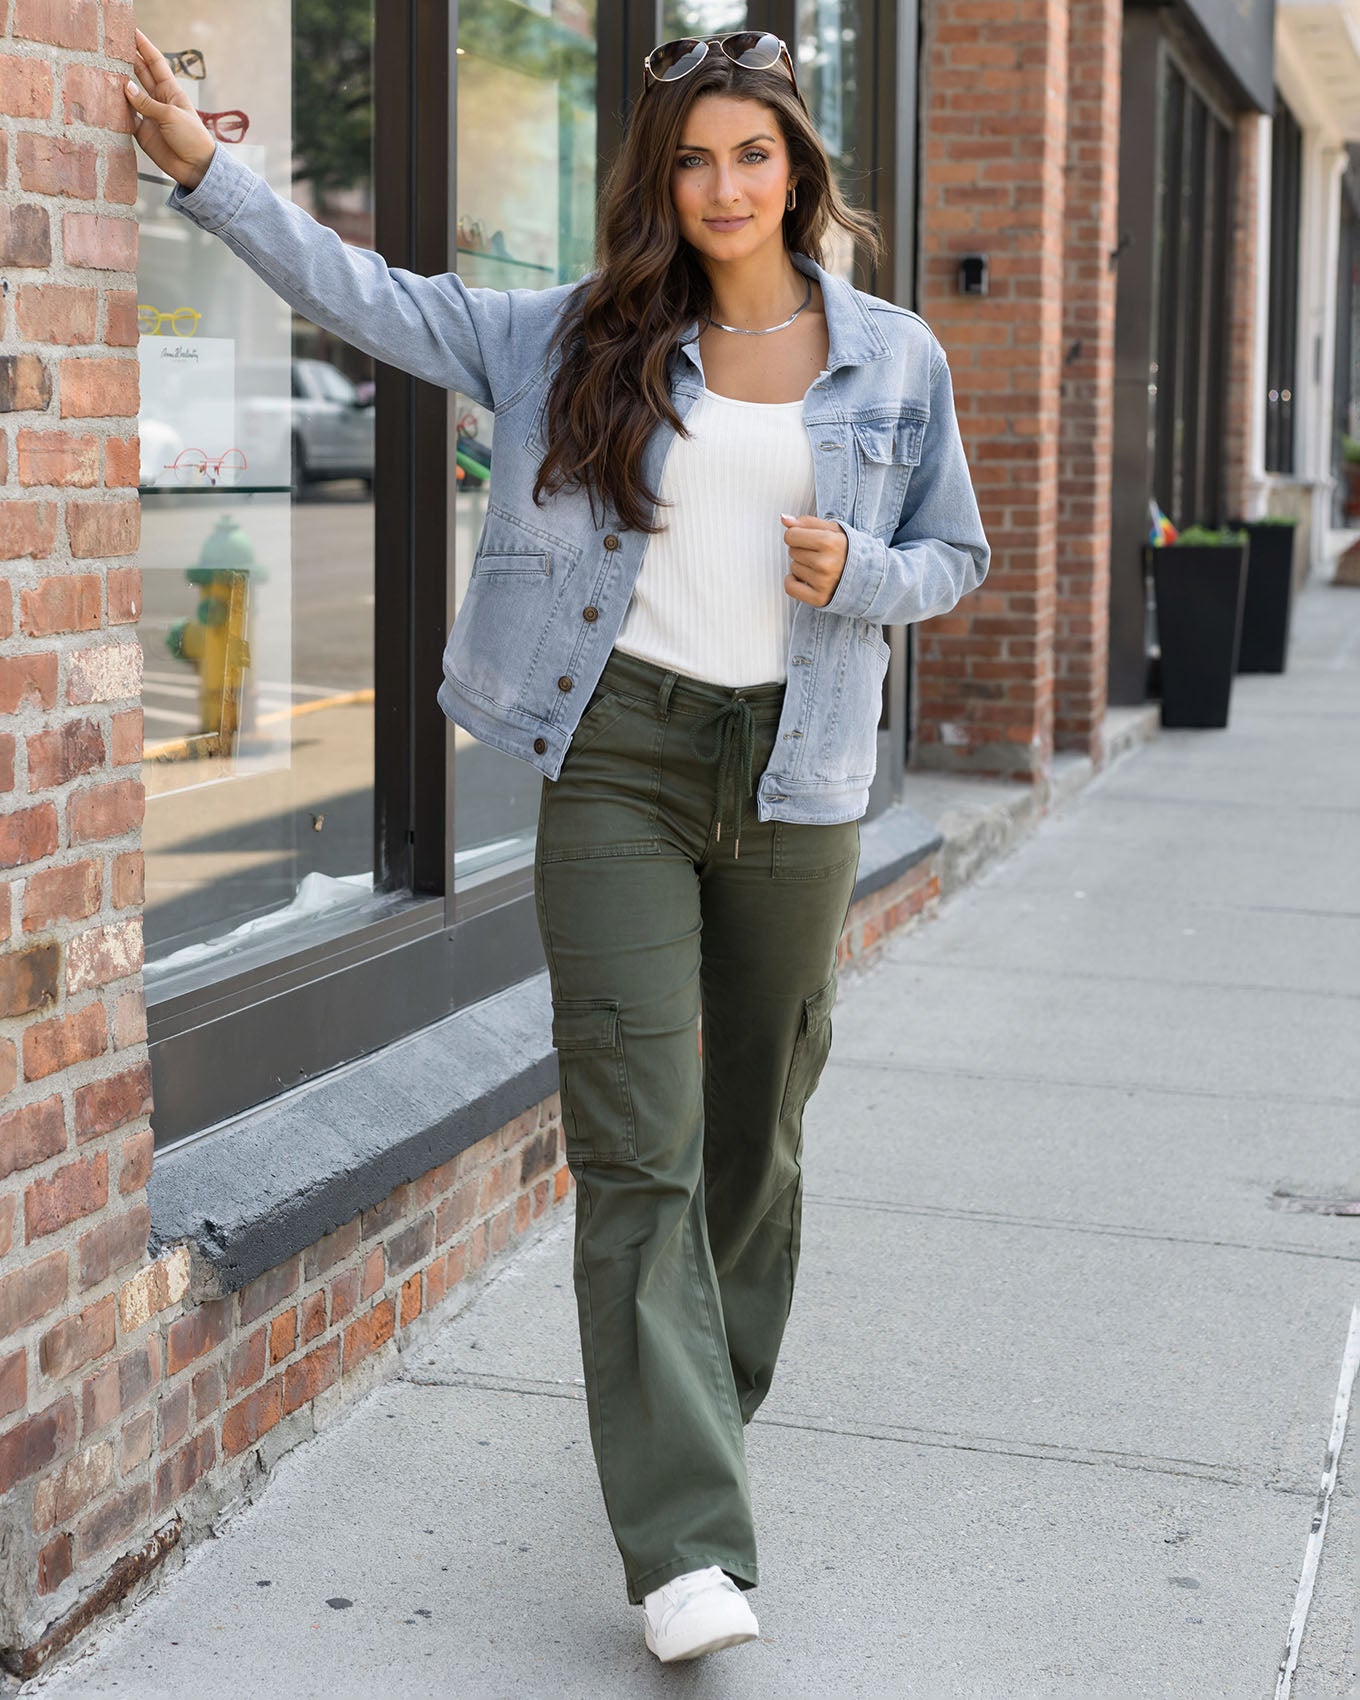 Olive Military Jacket with Black Leggings Outfits (6 ideas & outfits)